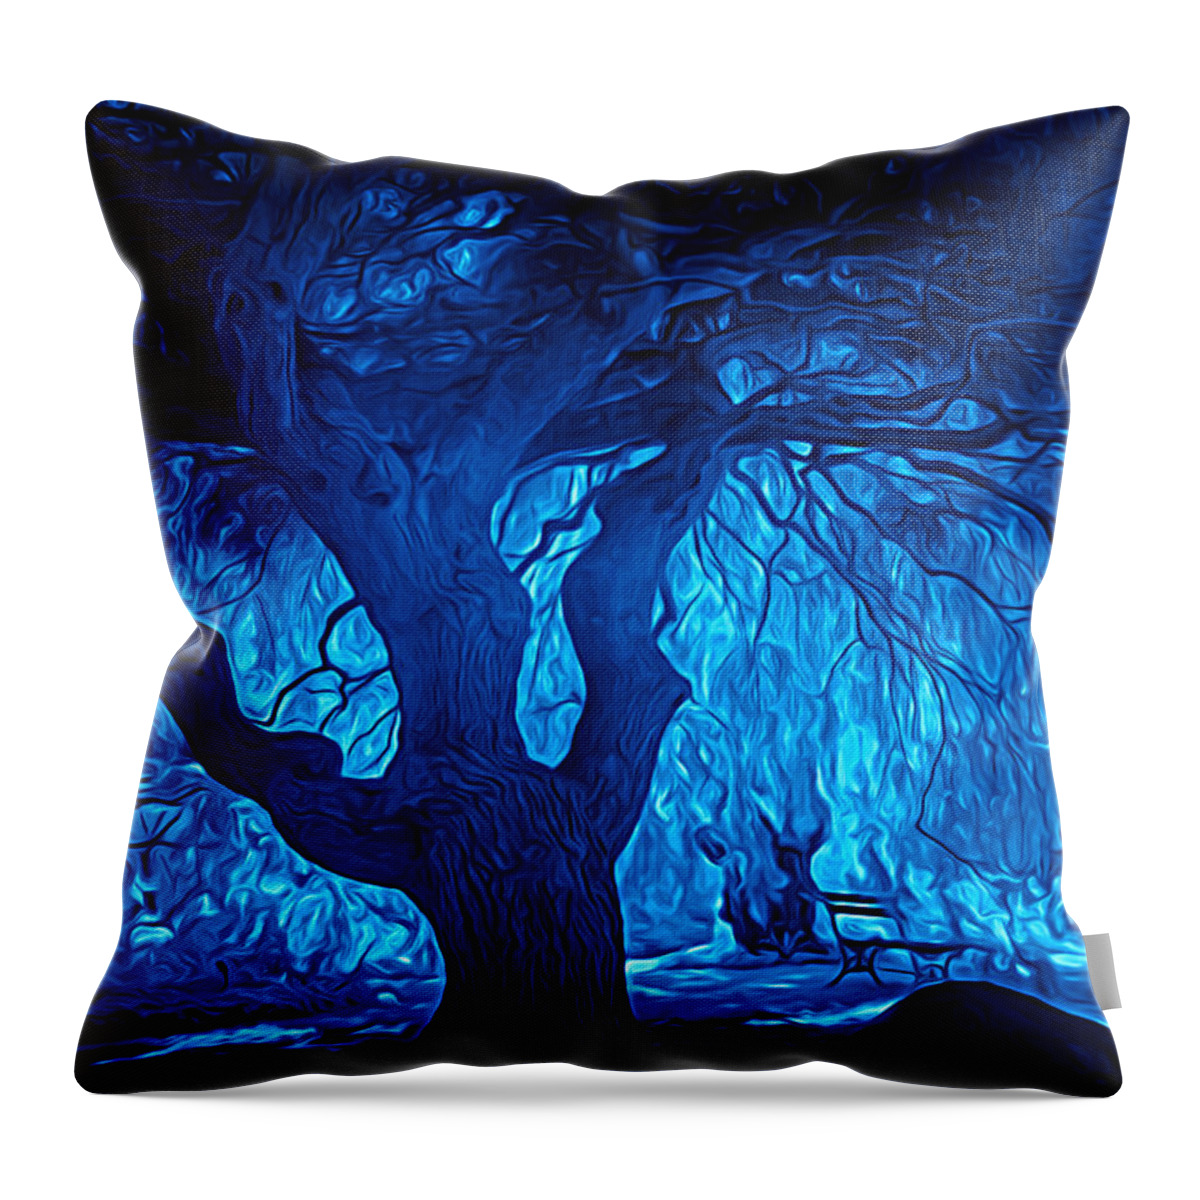 Blue Throw Pillow featuring the digital art In the Blues by Lilia S